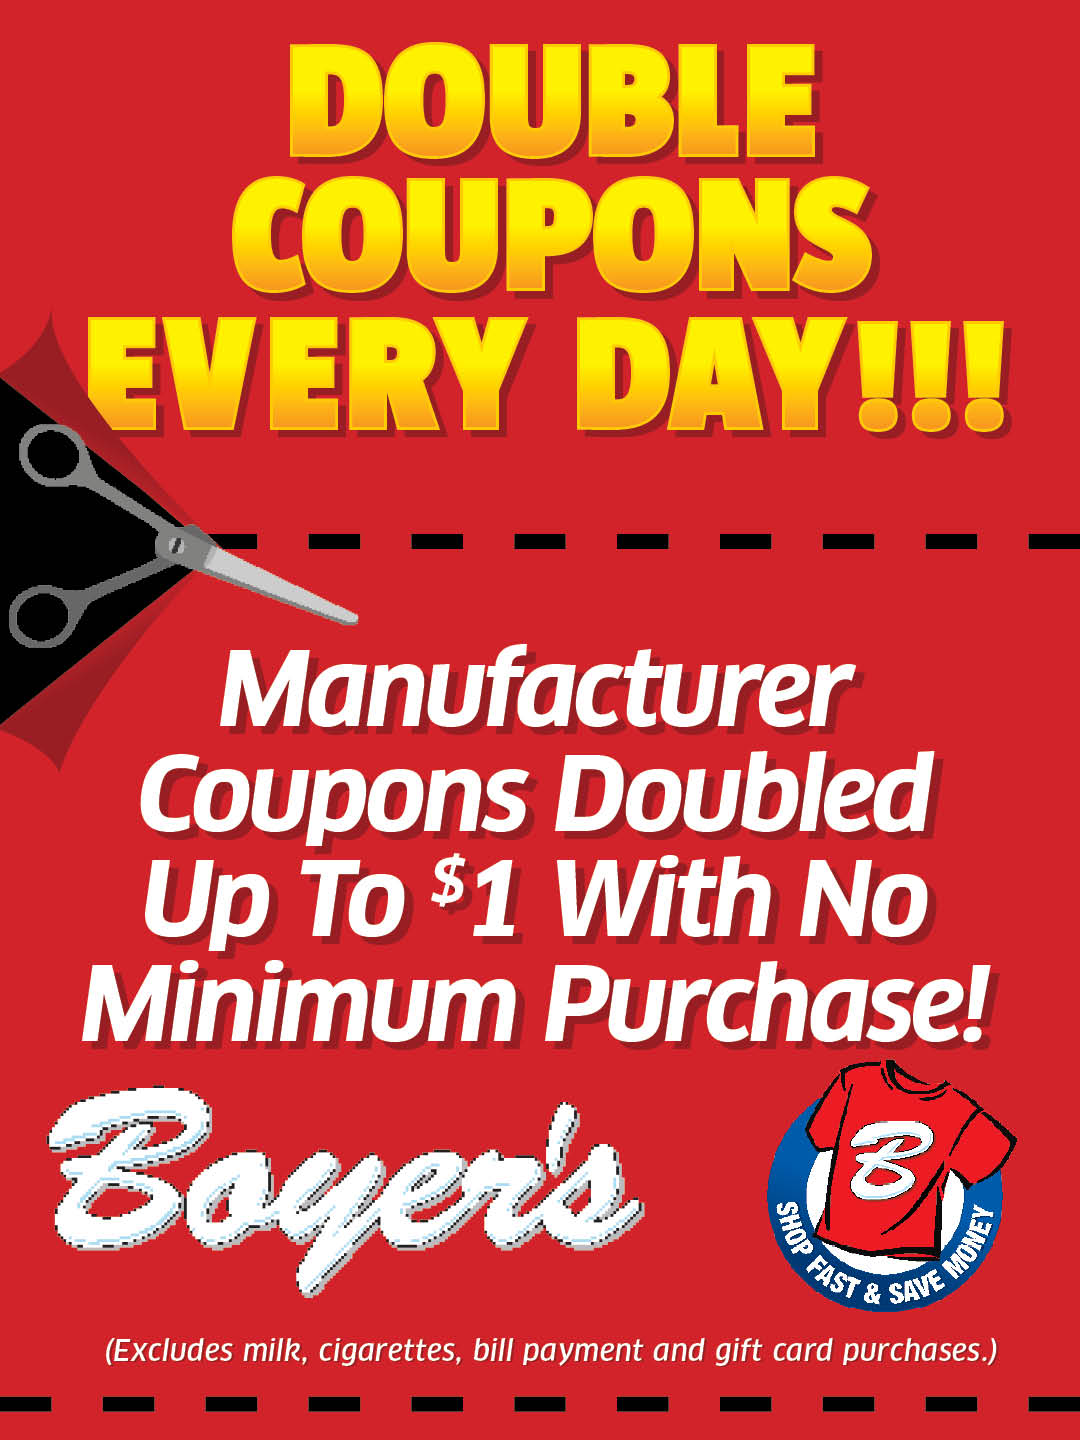 Double Coupons Every Day! Manufacturer coupons doubled up to $1 with no minimum purchase! Boyers. (Excludes milk, cigarettes, bill payment and gift card purchases.) 